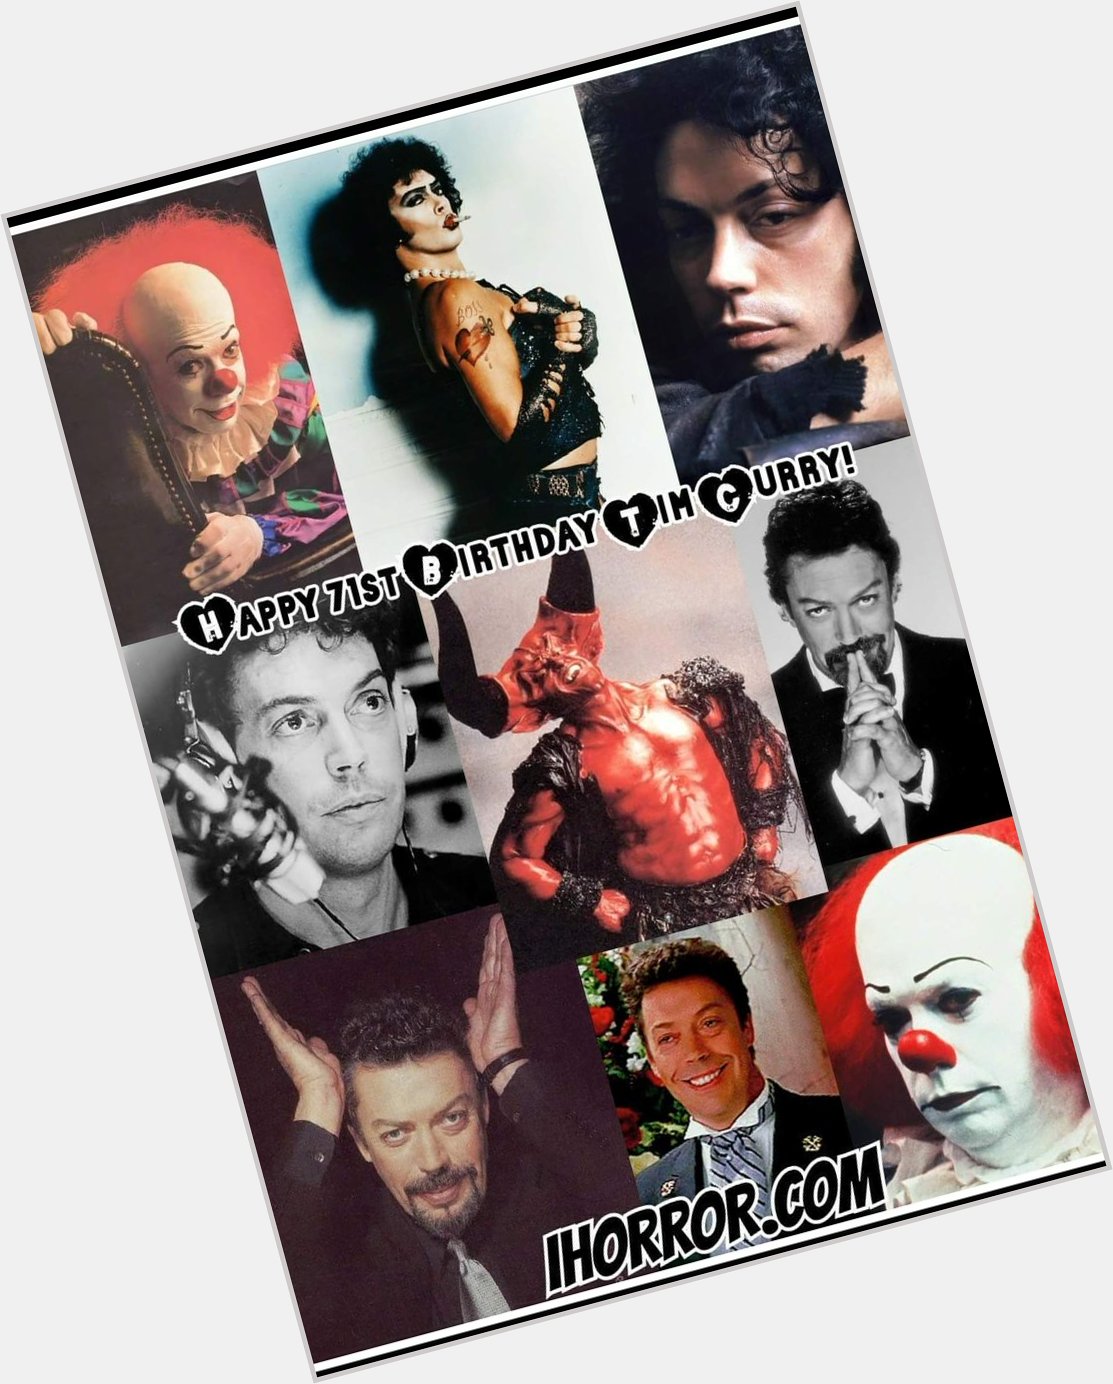 Happy birthday to one of my all-time favorite actors and musicians - Tim Curry! 